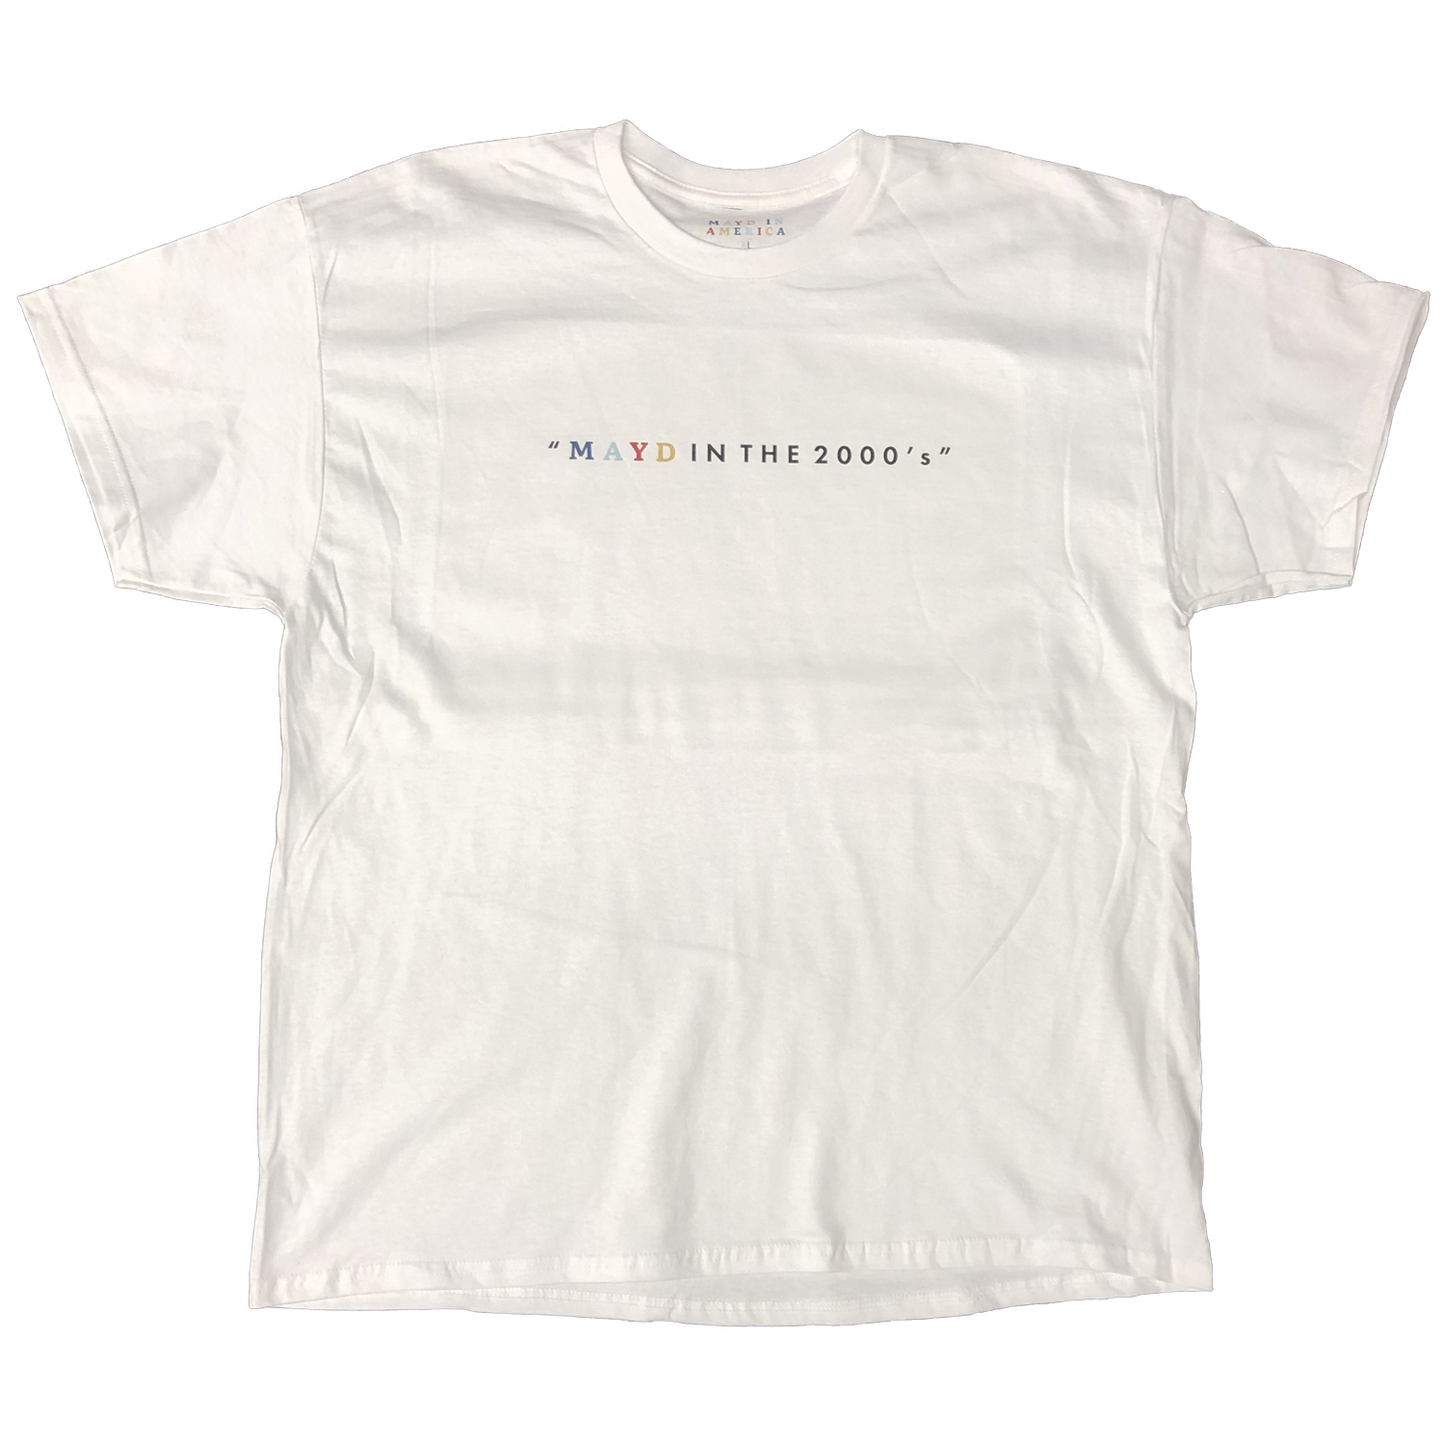 MAYD in America "Mayd in the 2000s" T-shirt